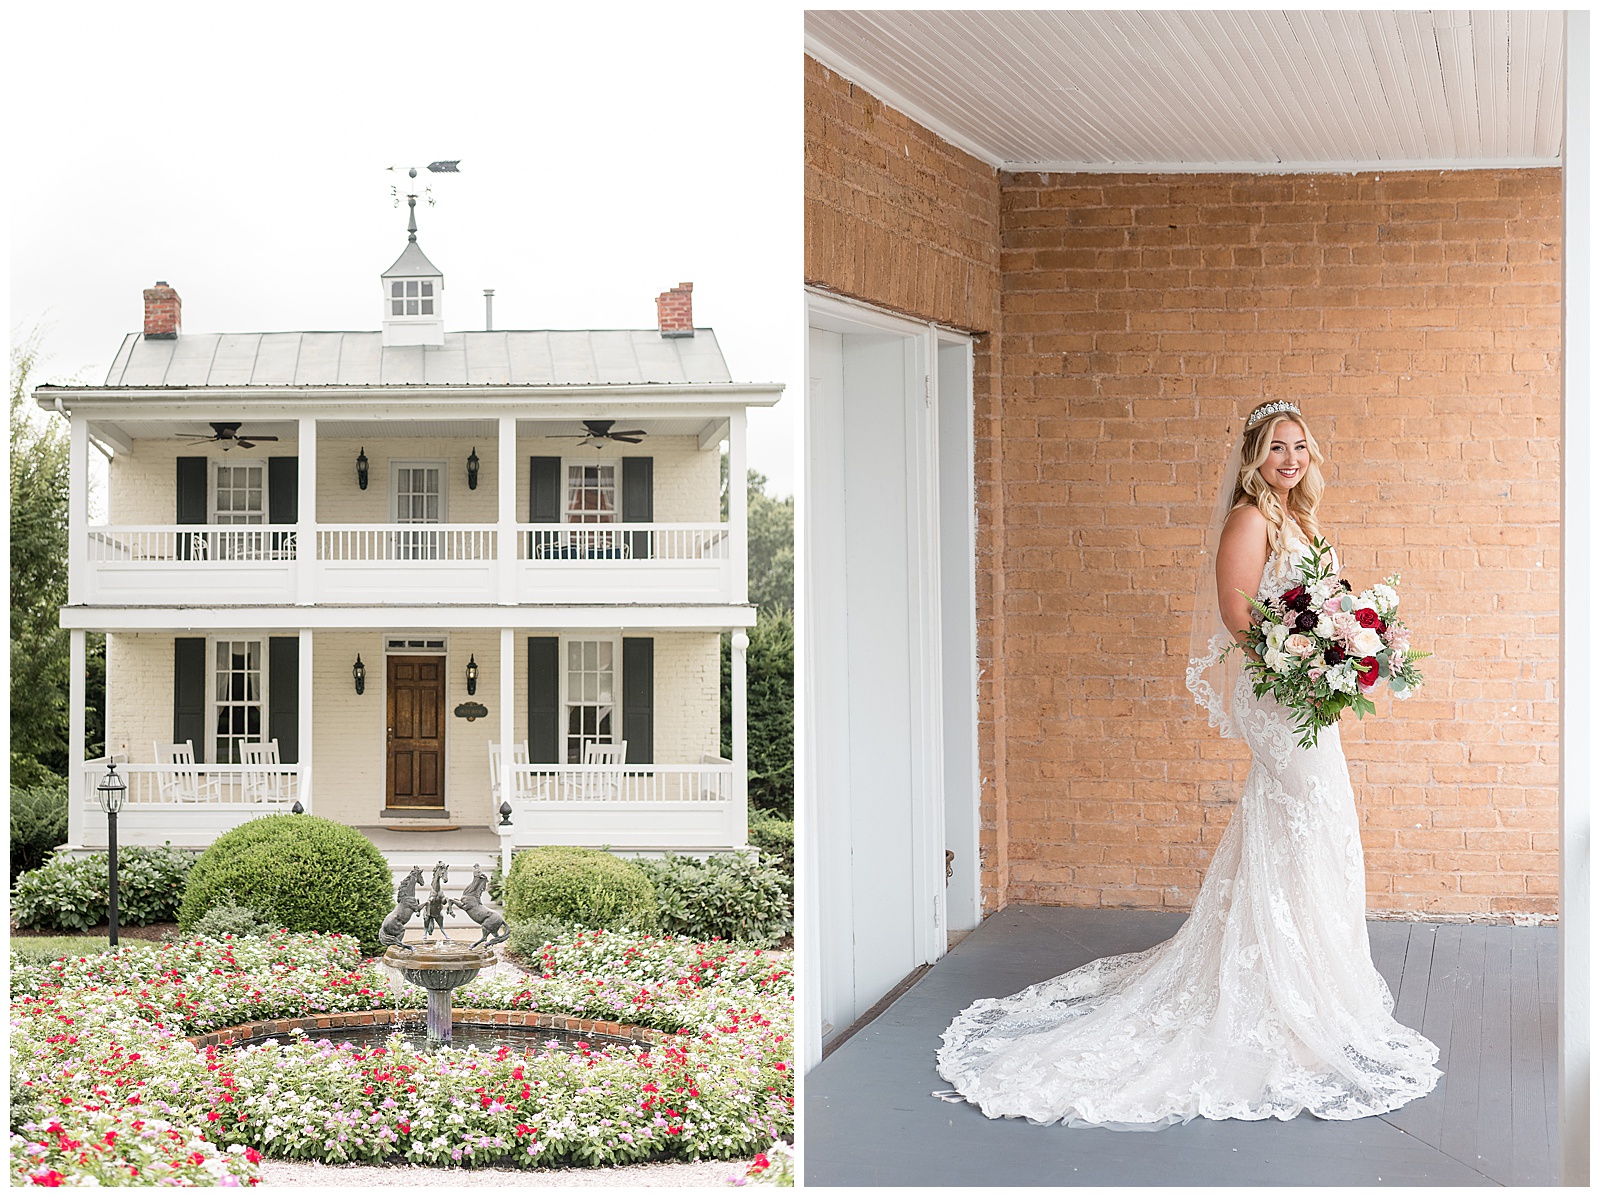 historic Antrim 1844 wedding venue's white home with black shutters and beautiful flower gardens with fountain